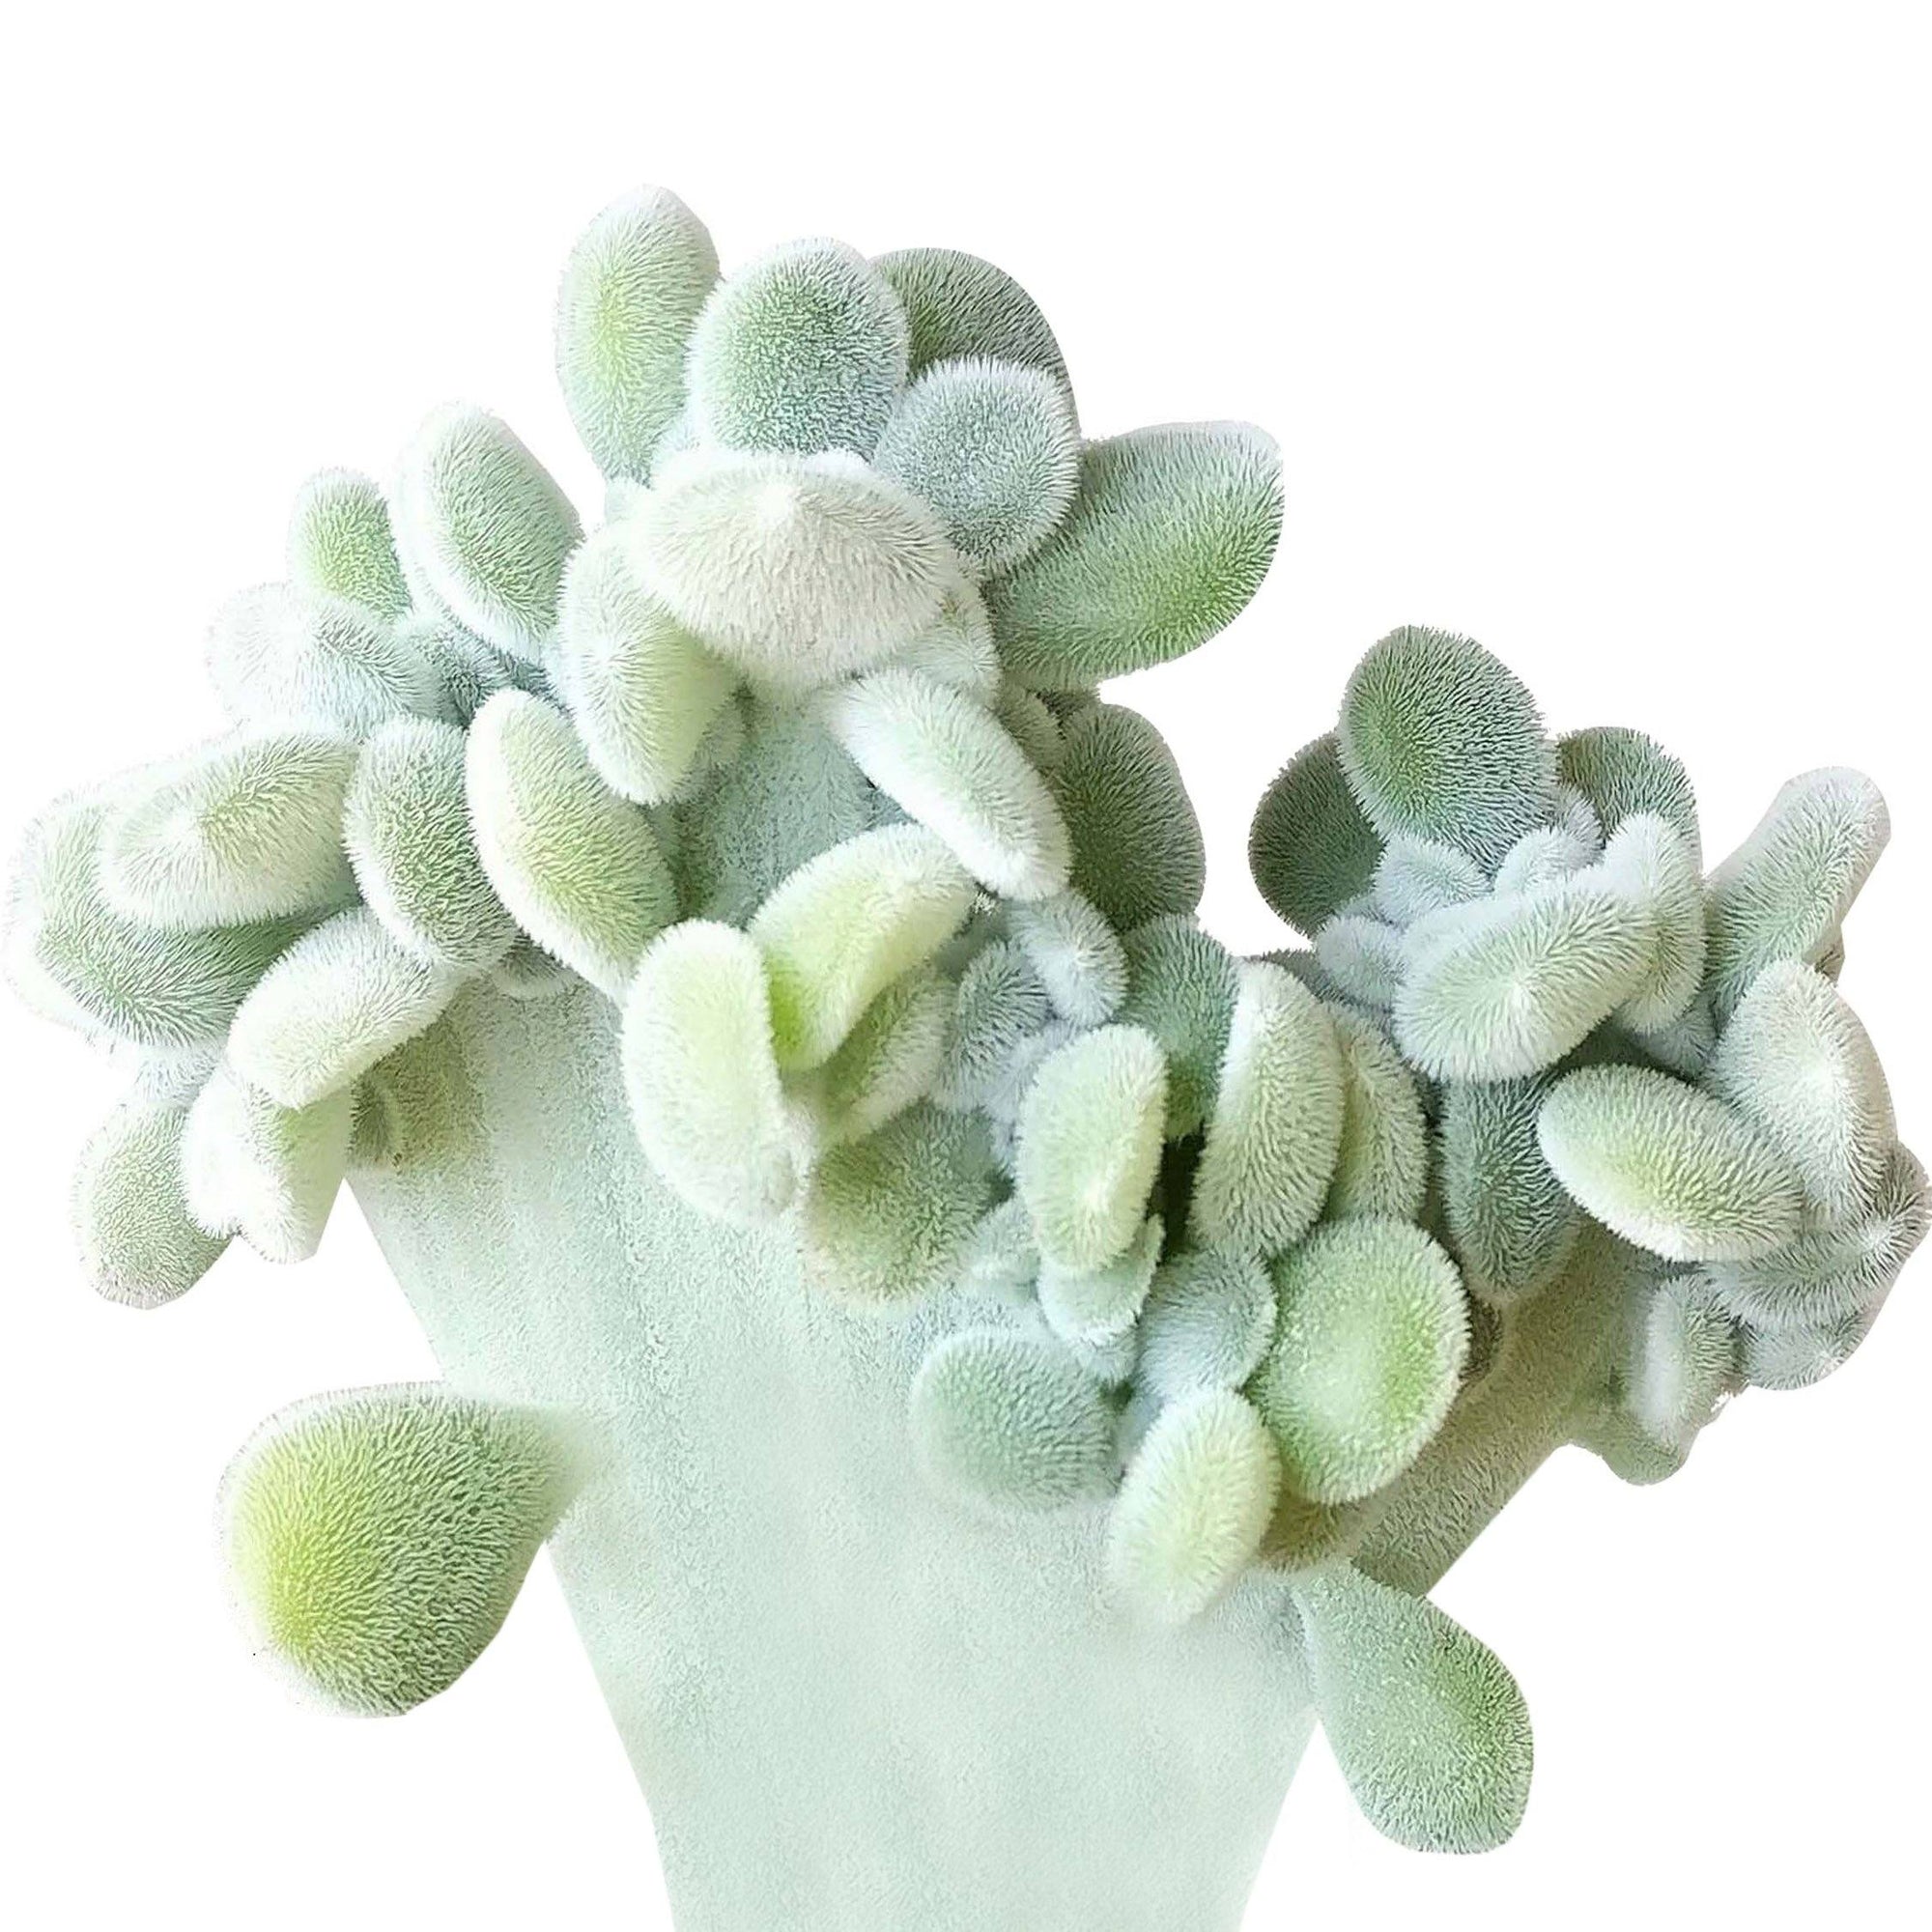 Crested Echeveria Frosty Care, succulents shop in California, cactus, how to grow succulents, succulent plant, succulent care, succulents store in CA, succulents garden, Rare succulents, Crested Echeveria Frosty in California, How to grow Crested Echeveria Frosty, Growing succulents for thanksgiving, indoor succulents, echeveria, echeveria succulent, echeveria types, succulent echeveria, buy succulents online, succulent shop, succulent store, echeveria plant